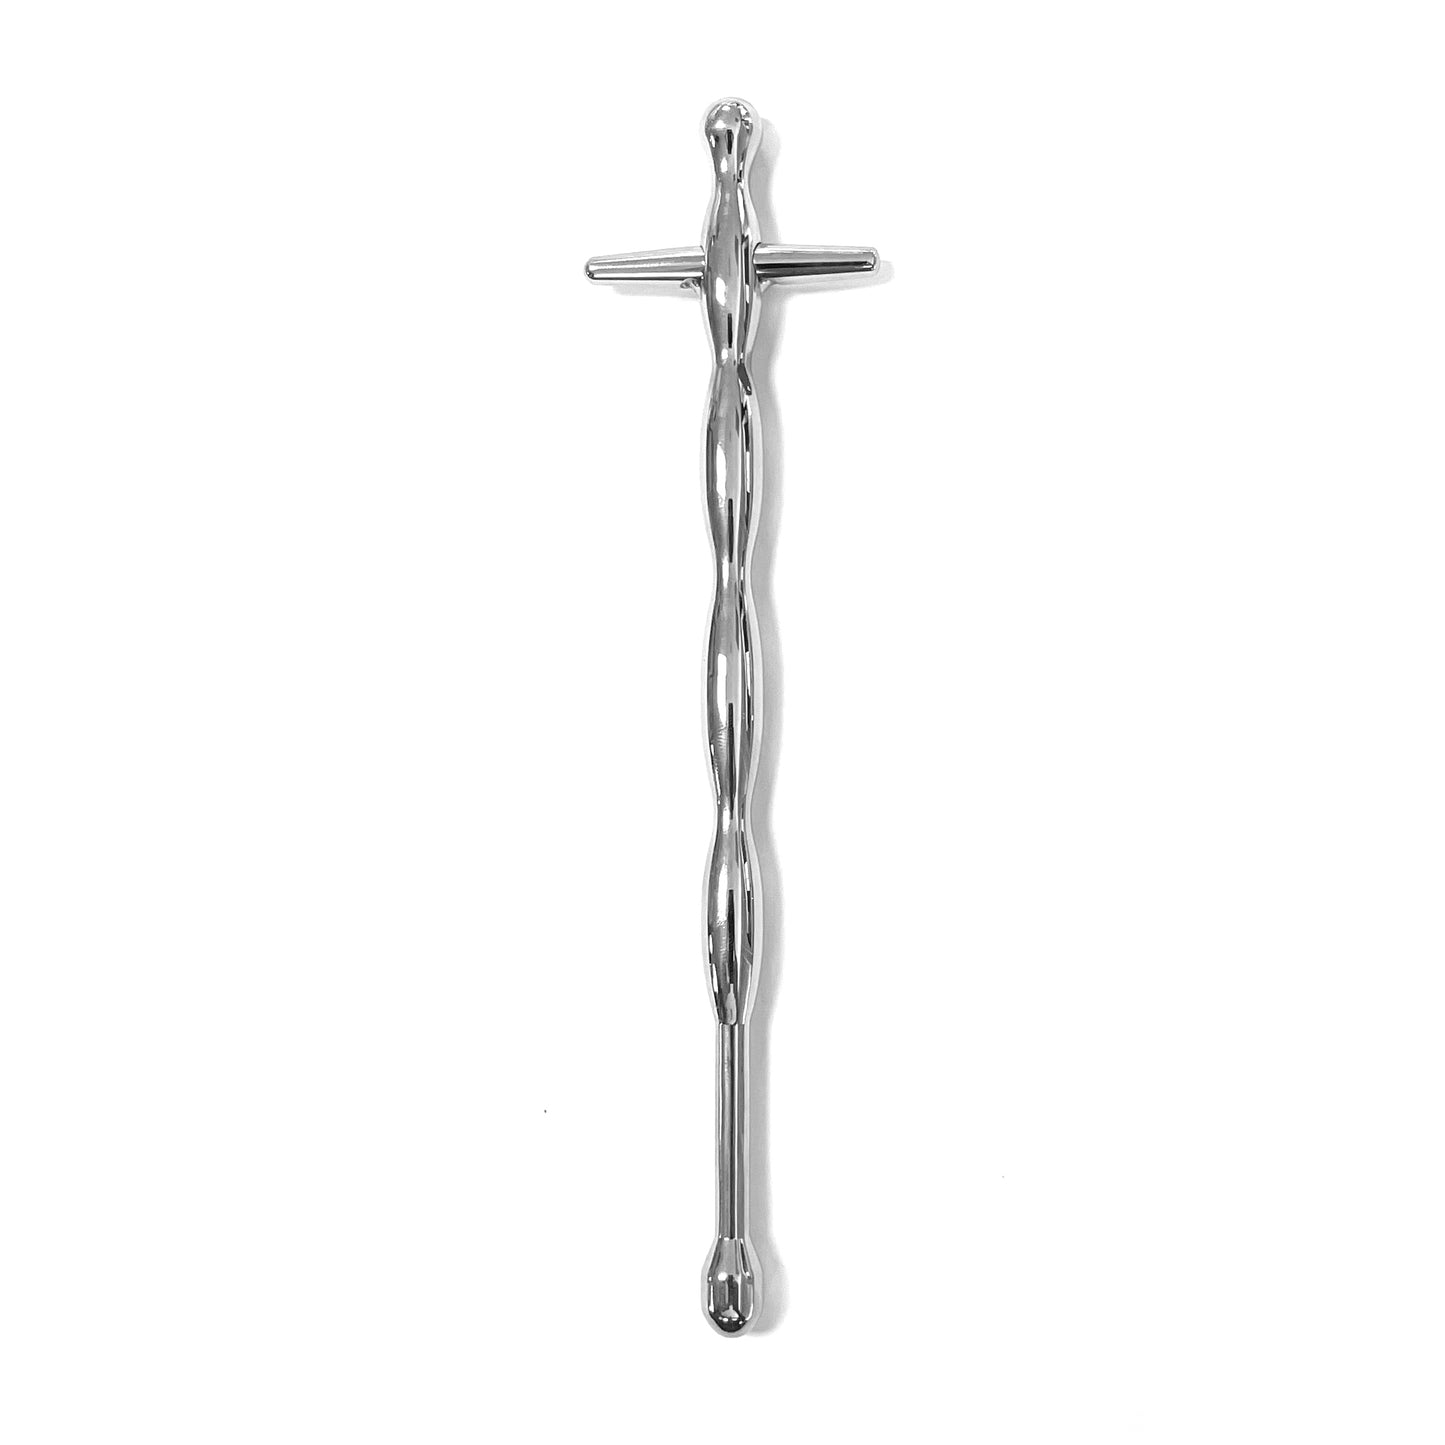 URETHRAL STAINLESS 5IN SMOOTH WITH CROSS TOP